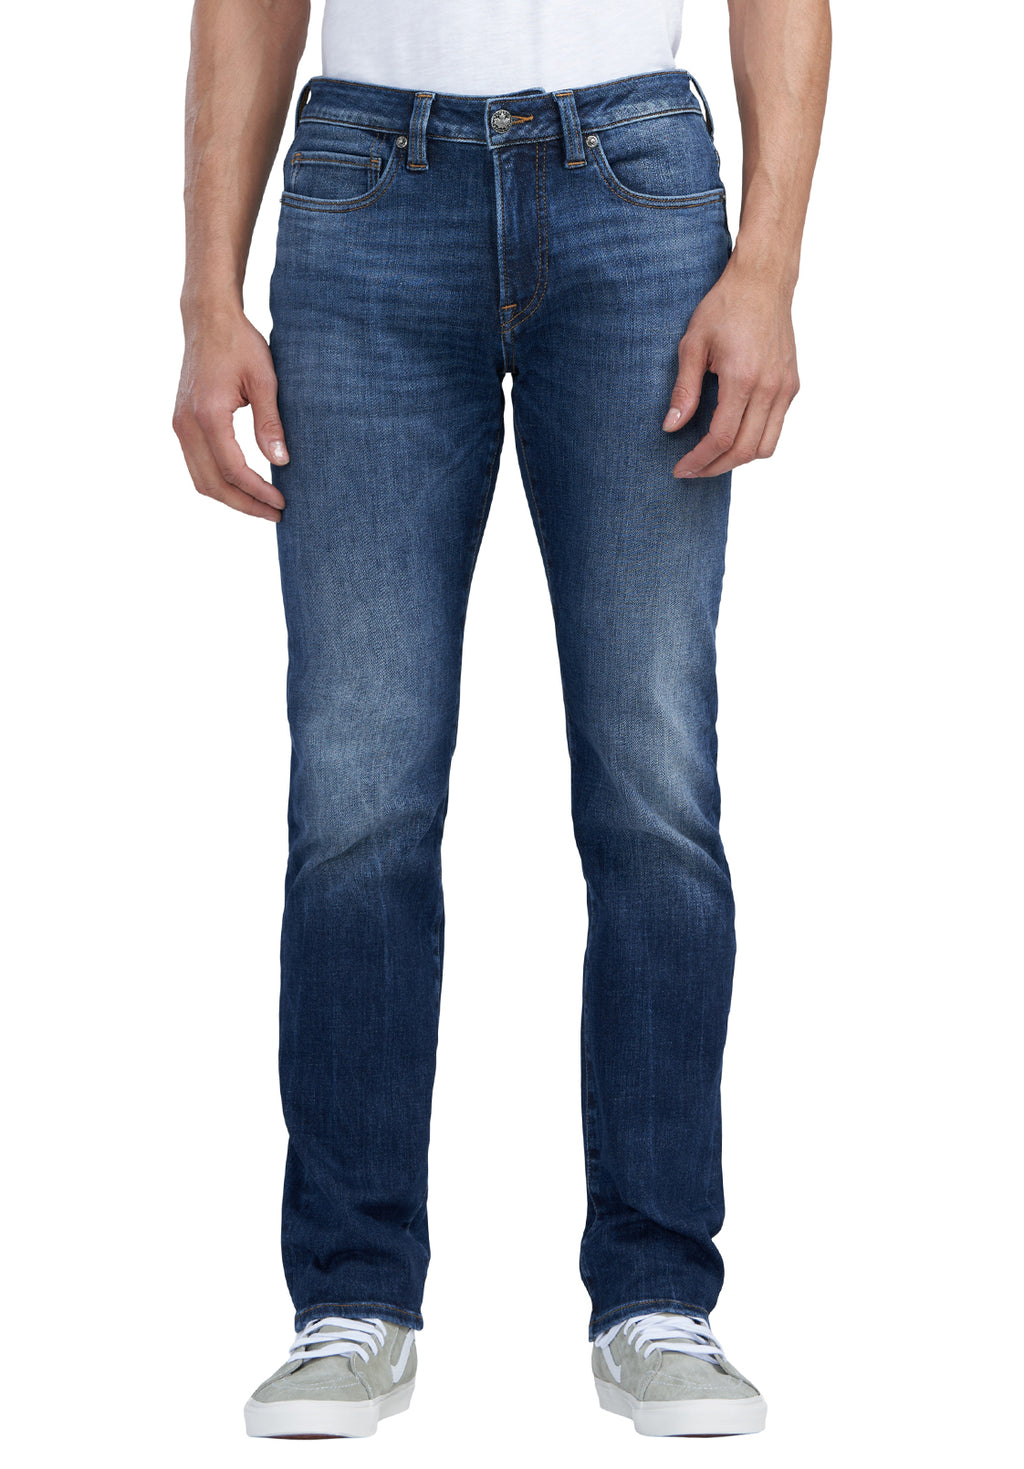 Straight Six Men's Jeans in Veined and Crinkled Indigo – Buffalo Jeans - US